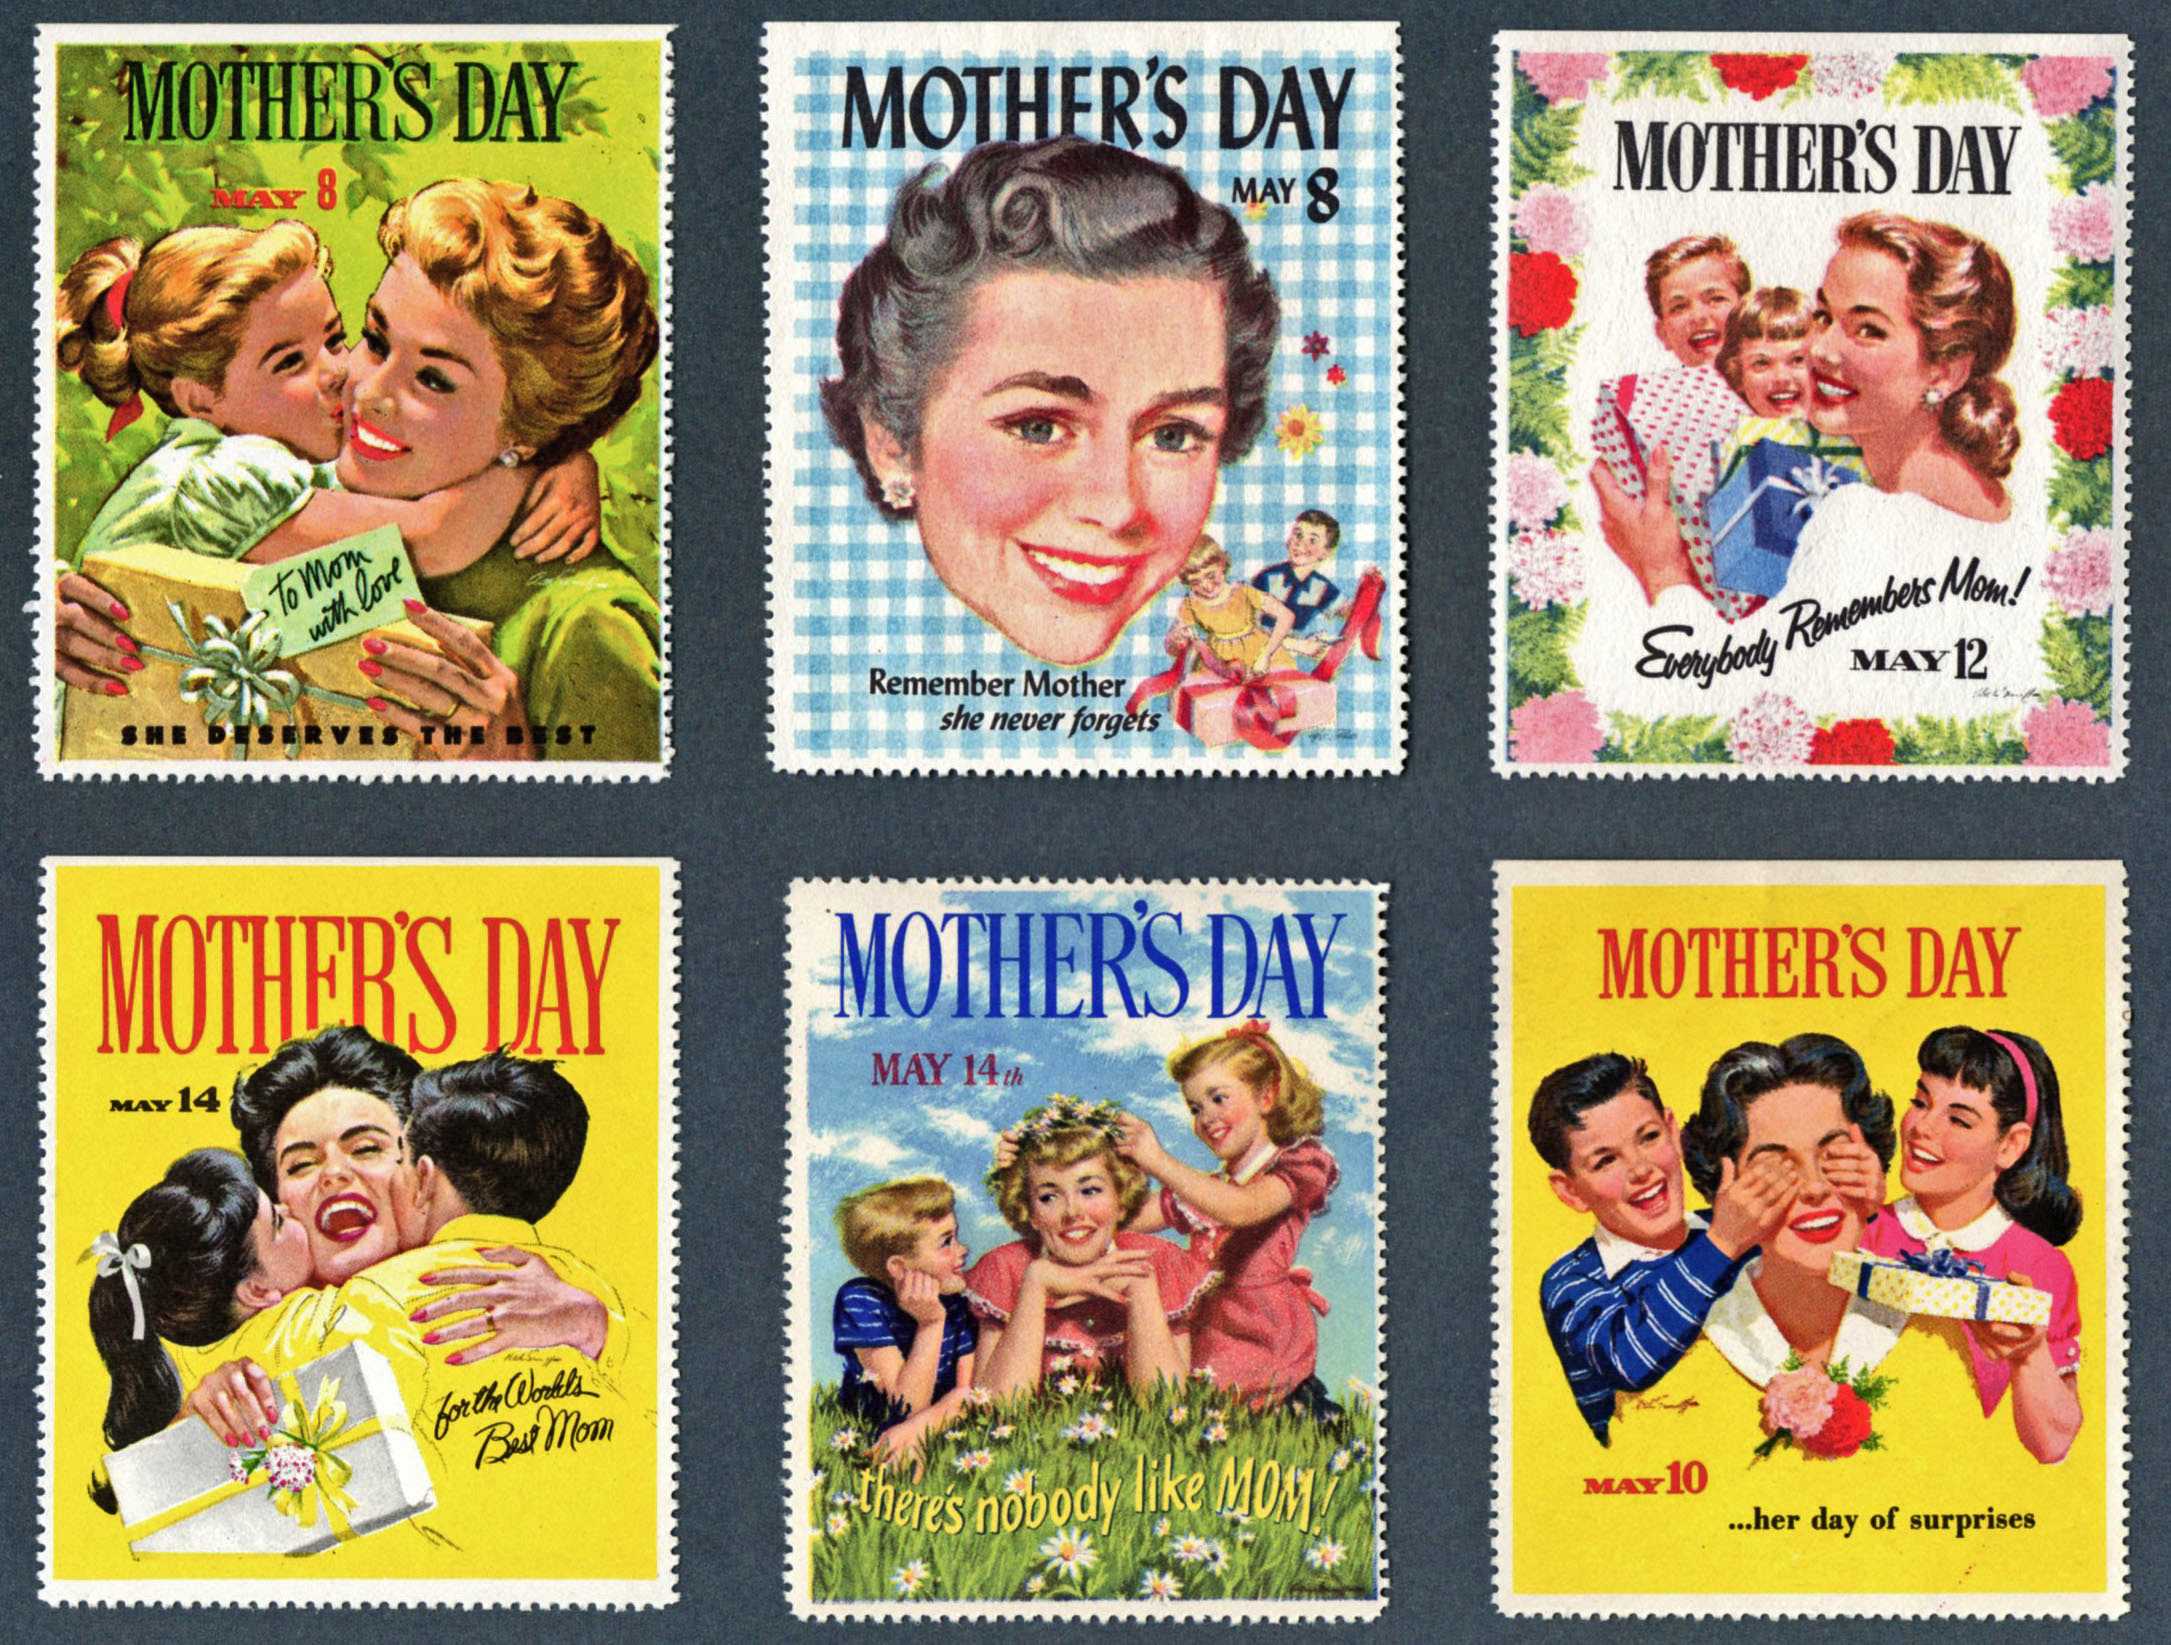 Mother's Day stamps - 1950s